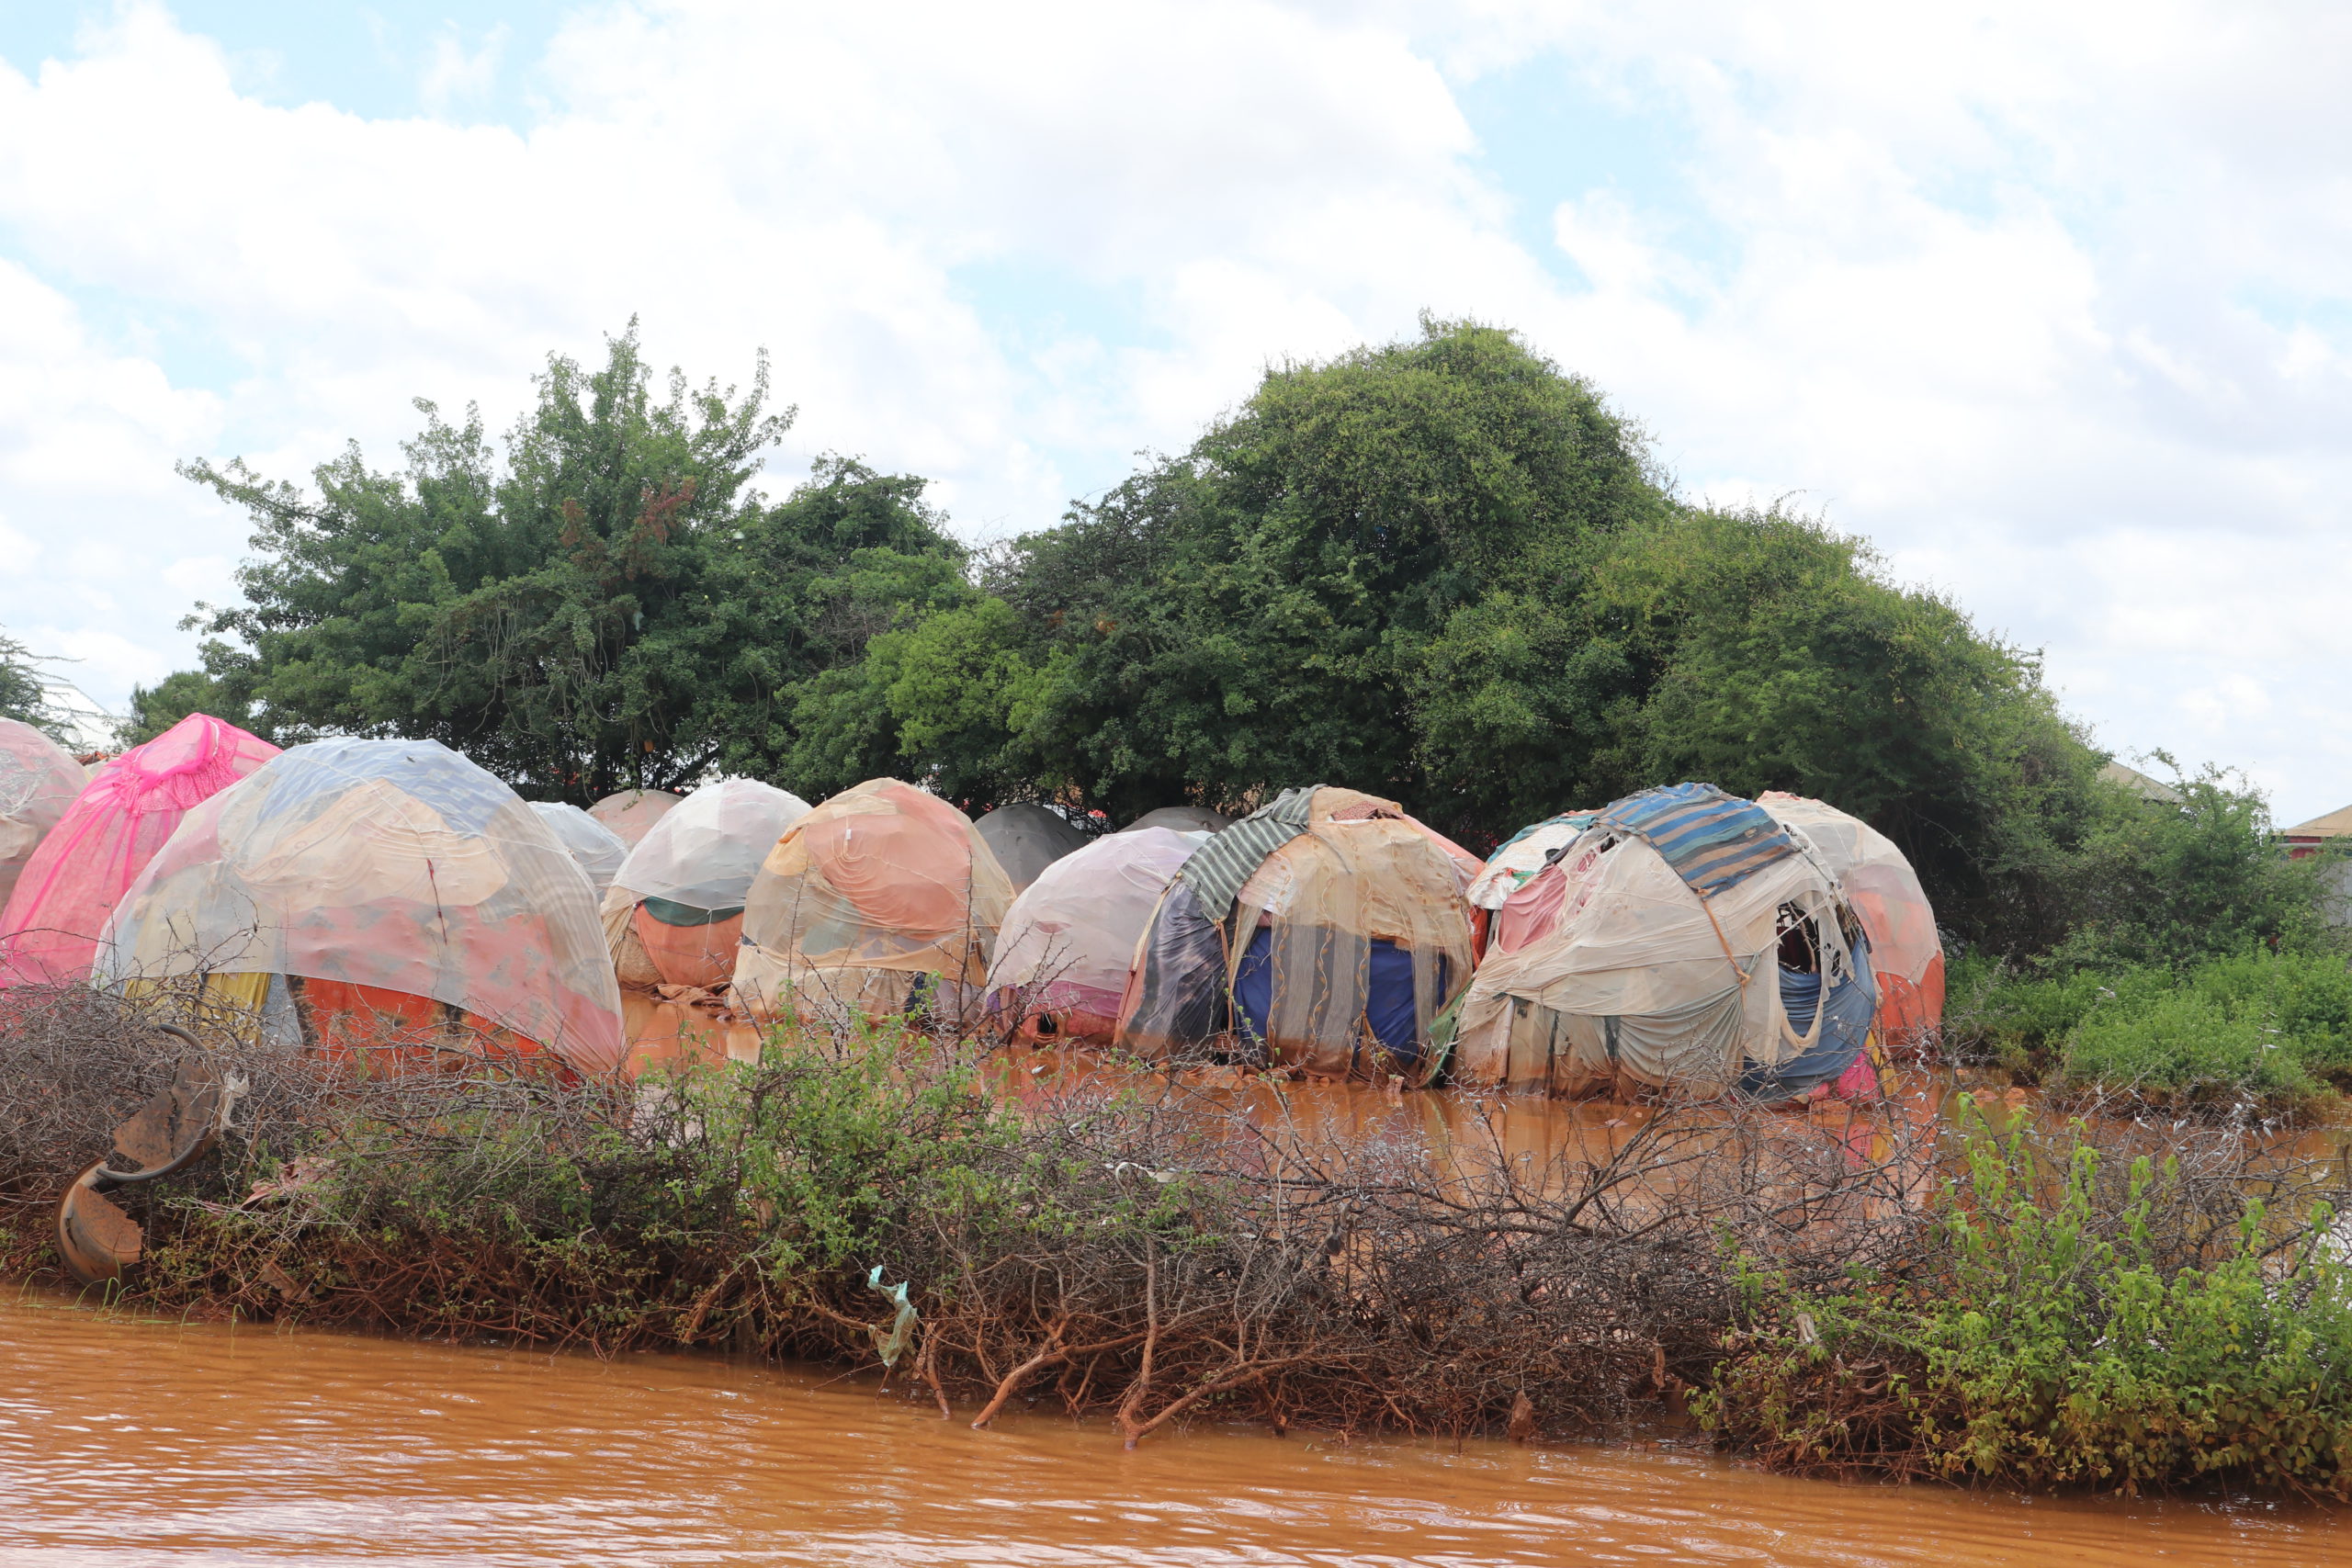 Temporary shelters surrounded by flooding in Baidoa, Somalia